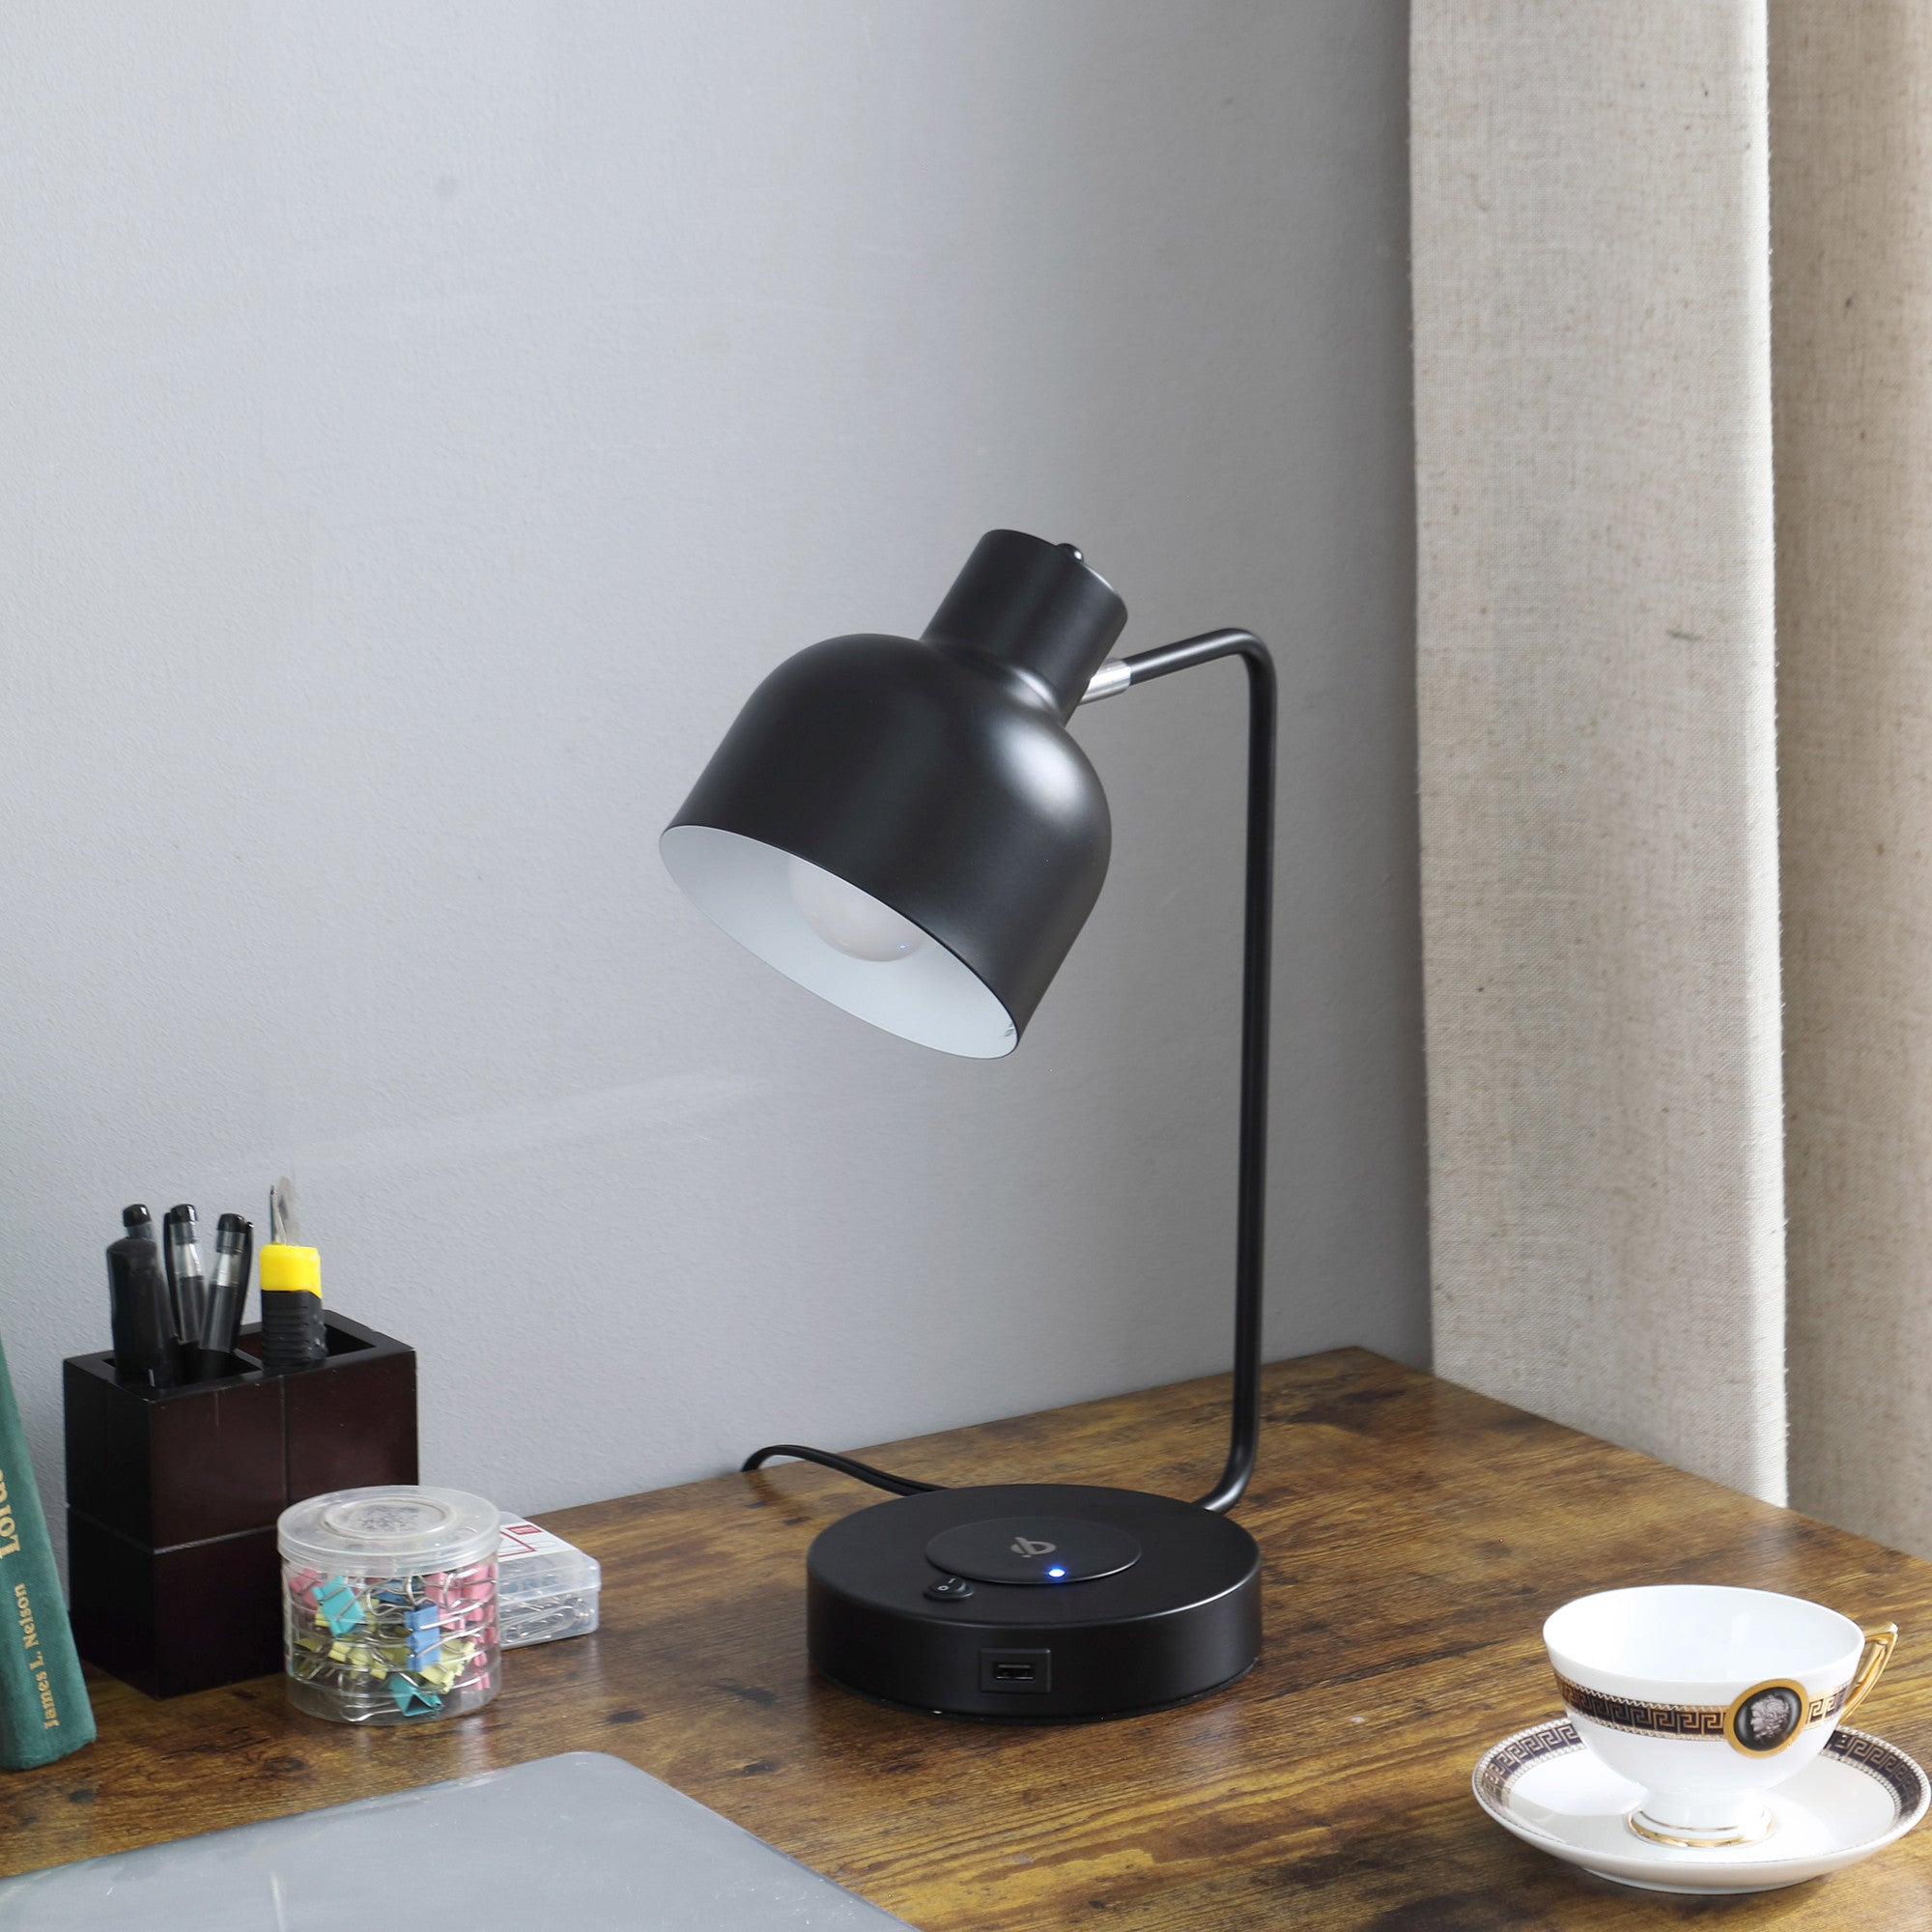 15" Black Metal Desk USB Table Lamp With Black Shade - Tuesday Morning-Table Lamps